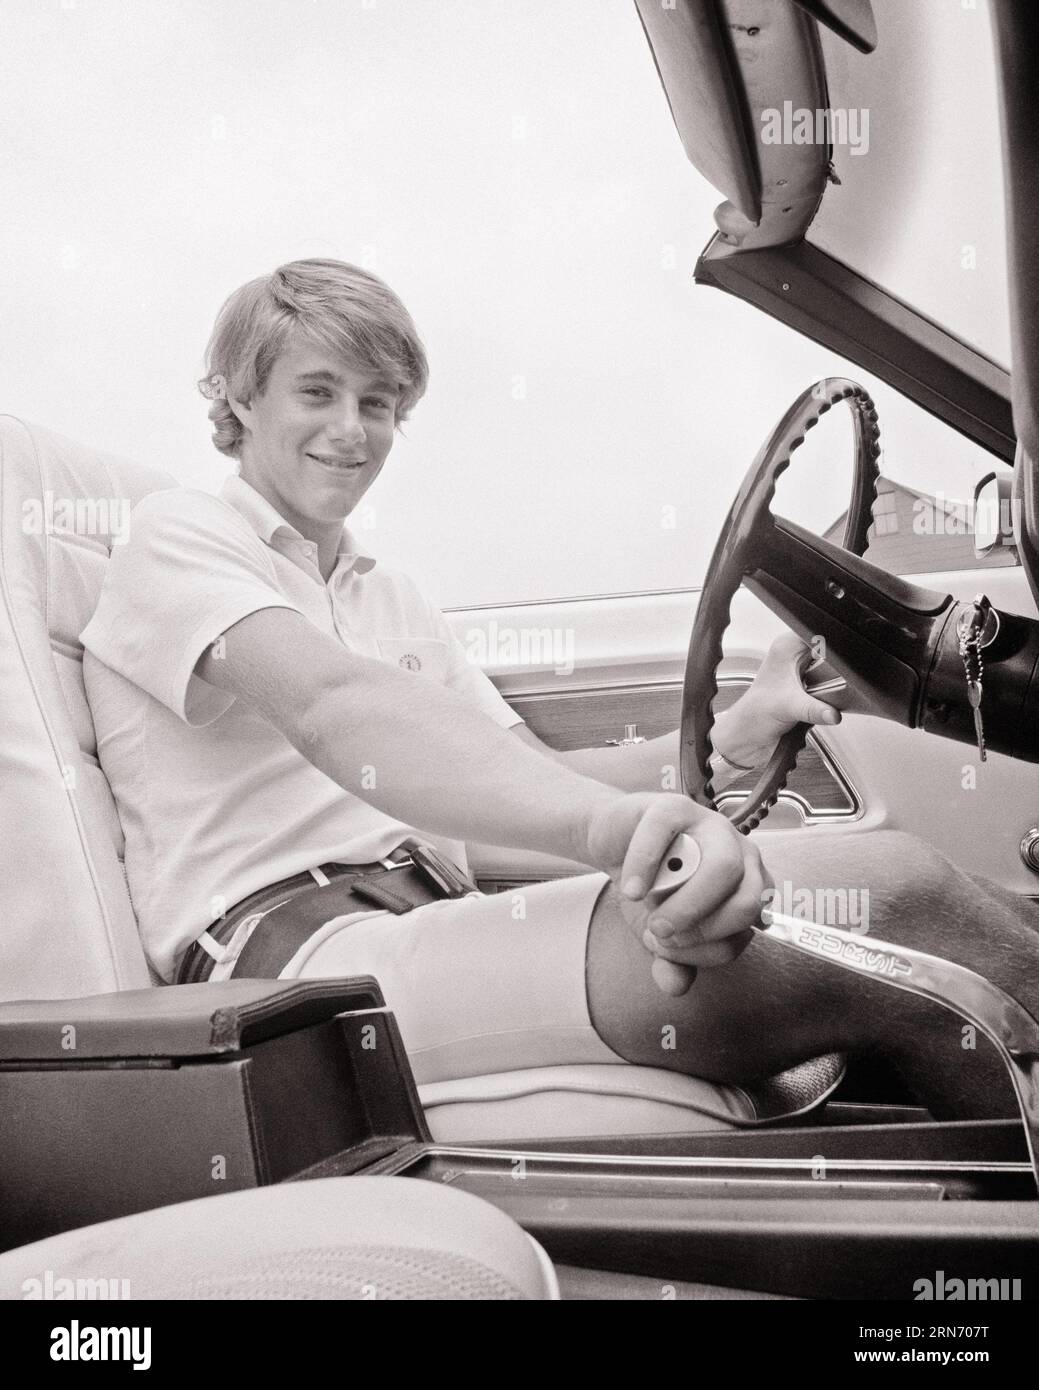 1970s SMILING TEENAGE BOY DRIVING A CONVERTIBLE CAR WITH MANUAL TRANSMISSION LOOKING AT CAMERA - m8648 HAR001 HARS MALES RISK TEENAGE BOY CONFIDENCE TRANSPORTATION B&W EYE CONTACT FREEDOM DREAMS HAPPINESS CHEERFUL ADVENTURE MANUAL SPORTY AUTOS EXCITEMENT LOW ANGLE POWERFUL PRIDE SMILES TRANSMISSION AUTOMOBILES ESCAPE JOYFUL TEENAGED VEHICLES FORD MUSTANG JUVENILES YOUNG ADULT WOMAN BLACK AND WHITE CAUCASIAN ETHNICITY HAR001 OLD FASHIONED Stock Photo